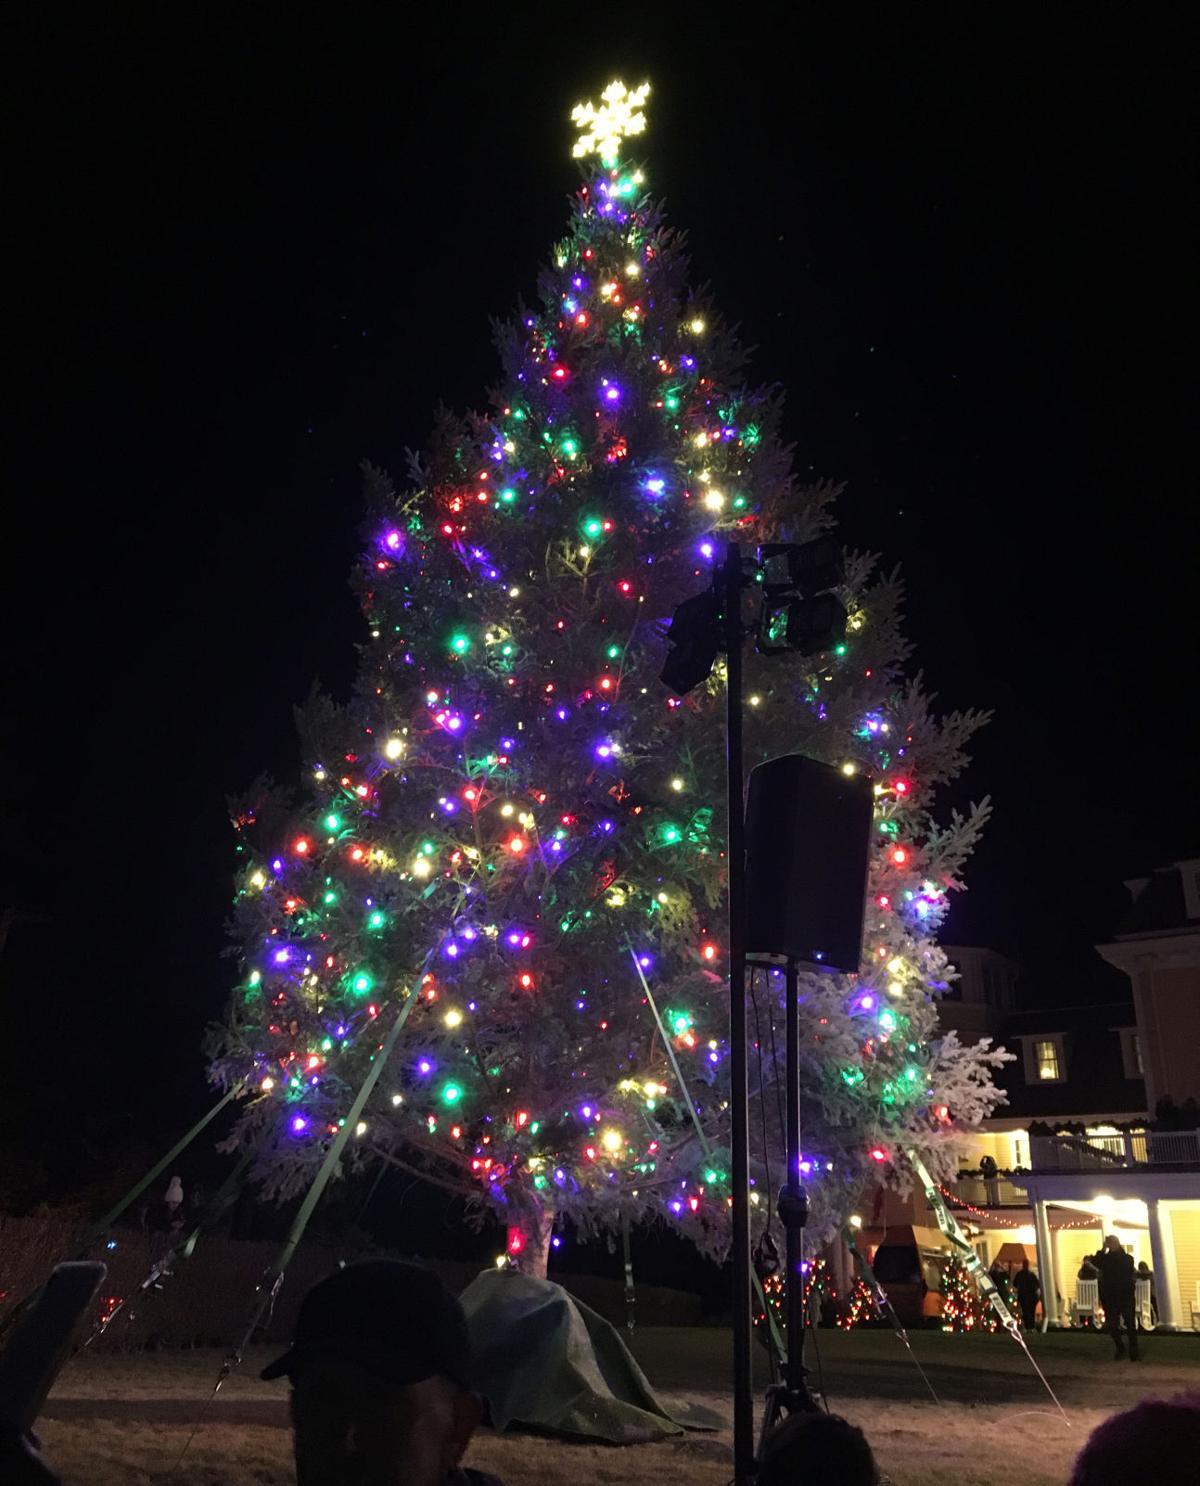 PHOTOS Ocean House was packed to the gills for its treelighting on